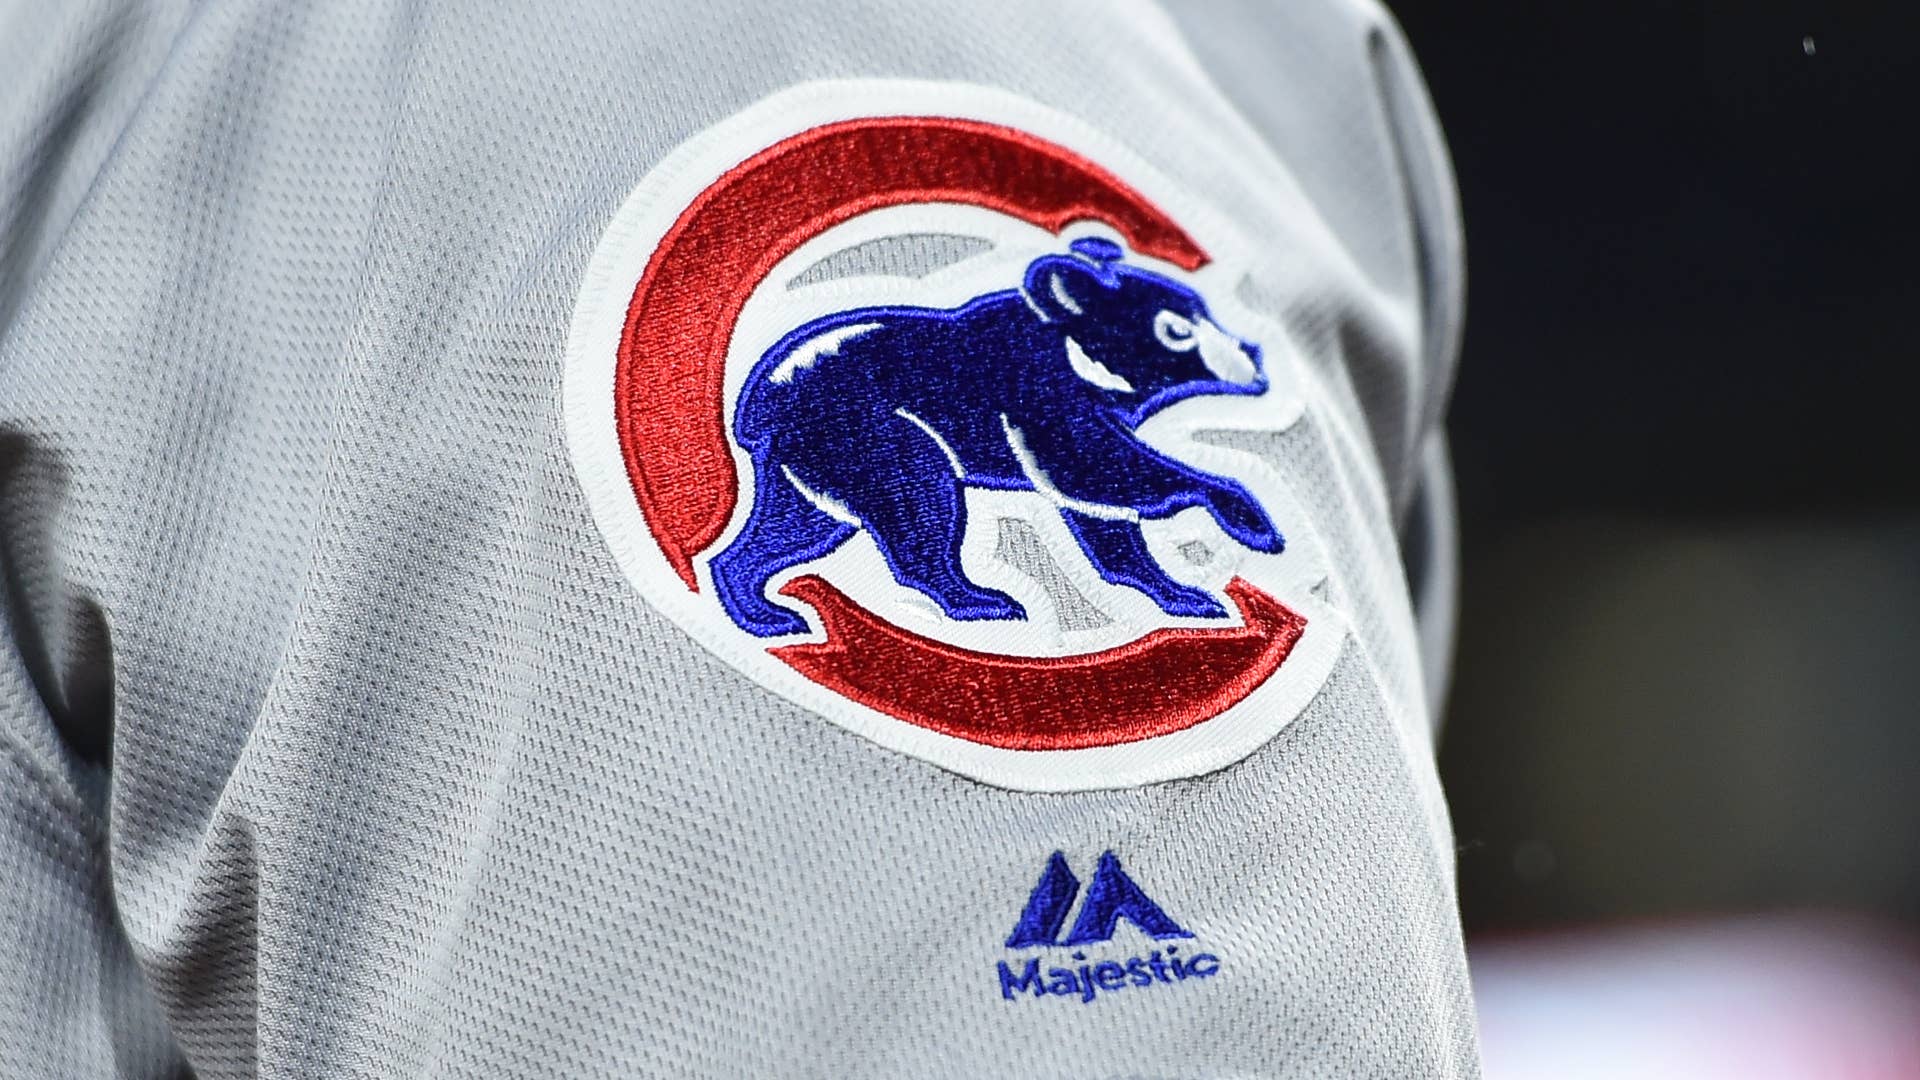 Chicago Cubs logo is displayed on the Majestic jersey.